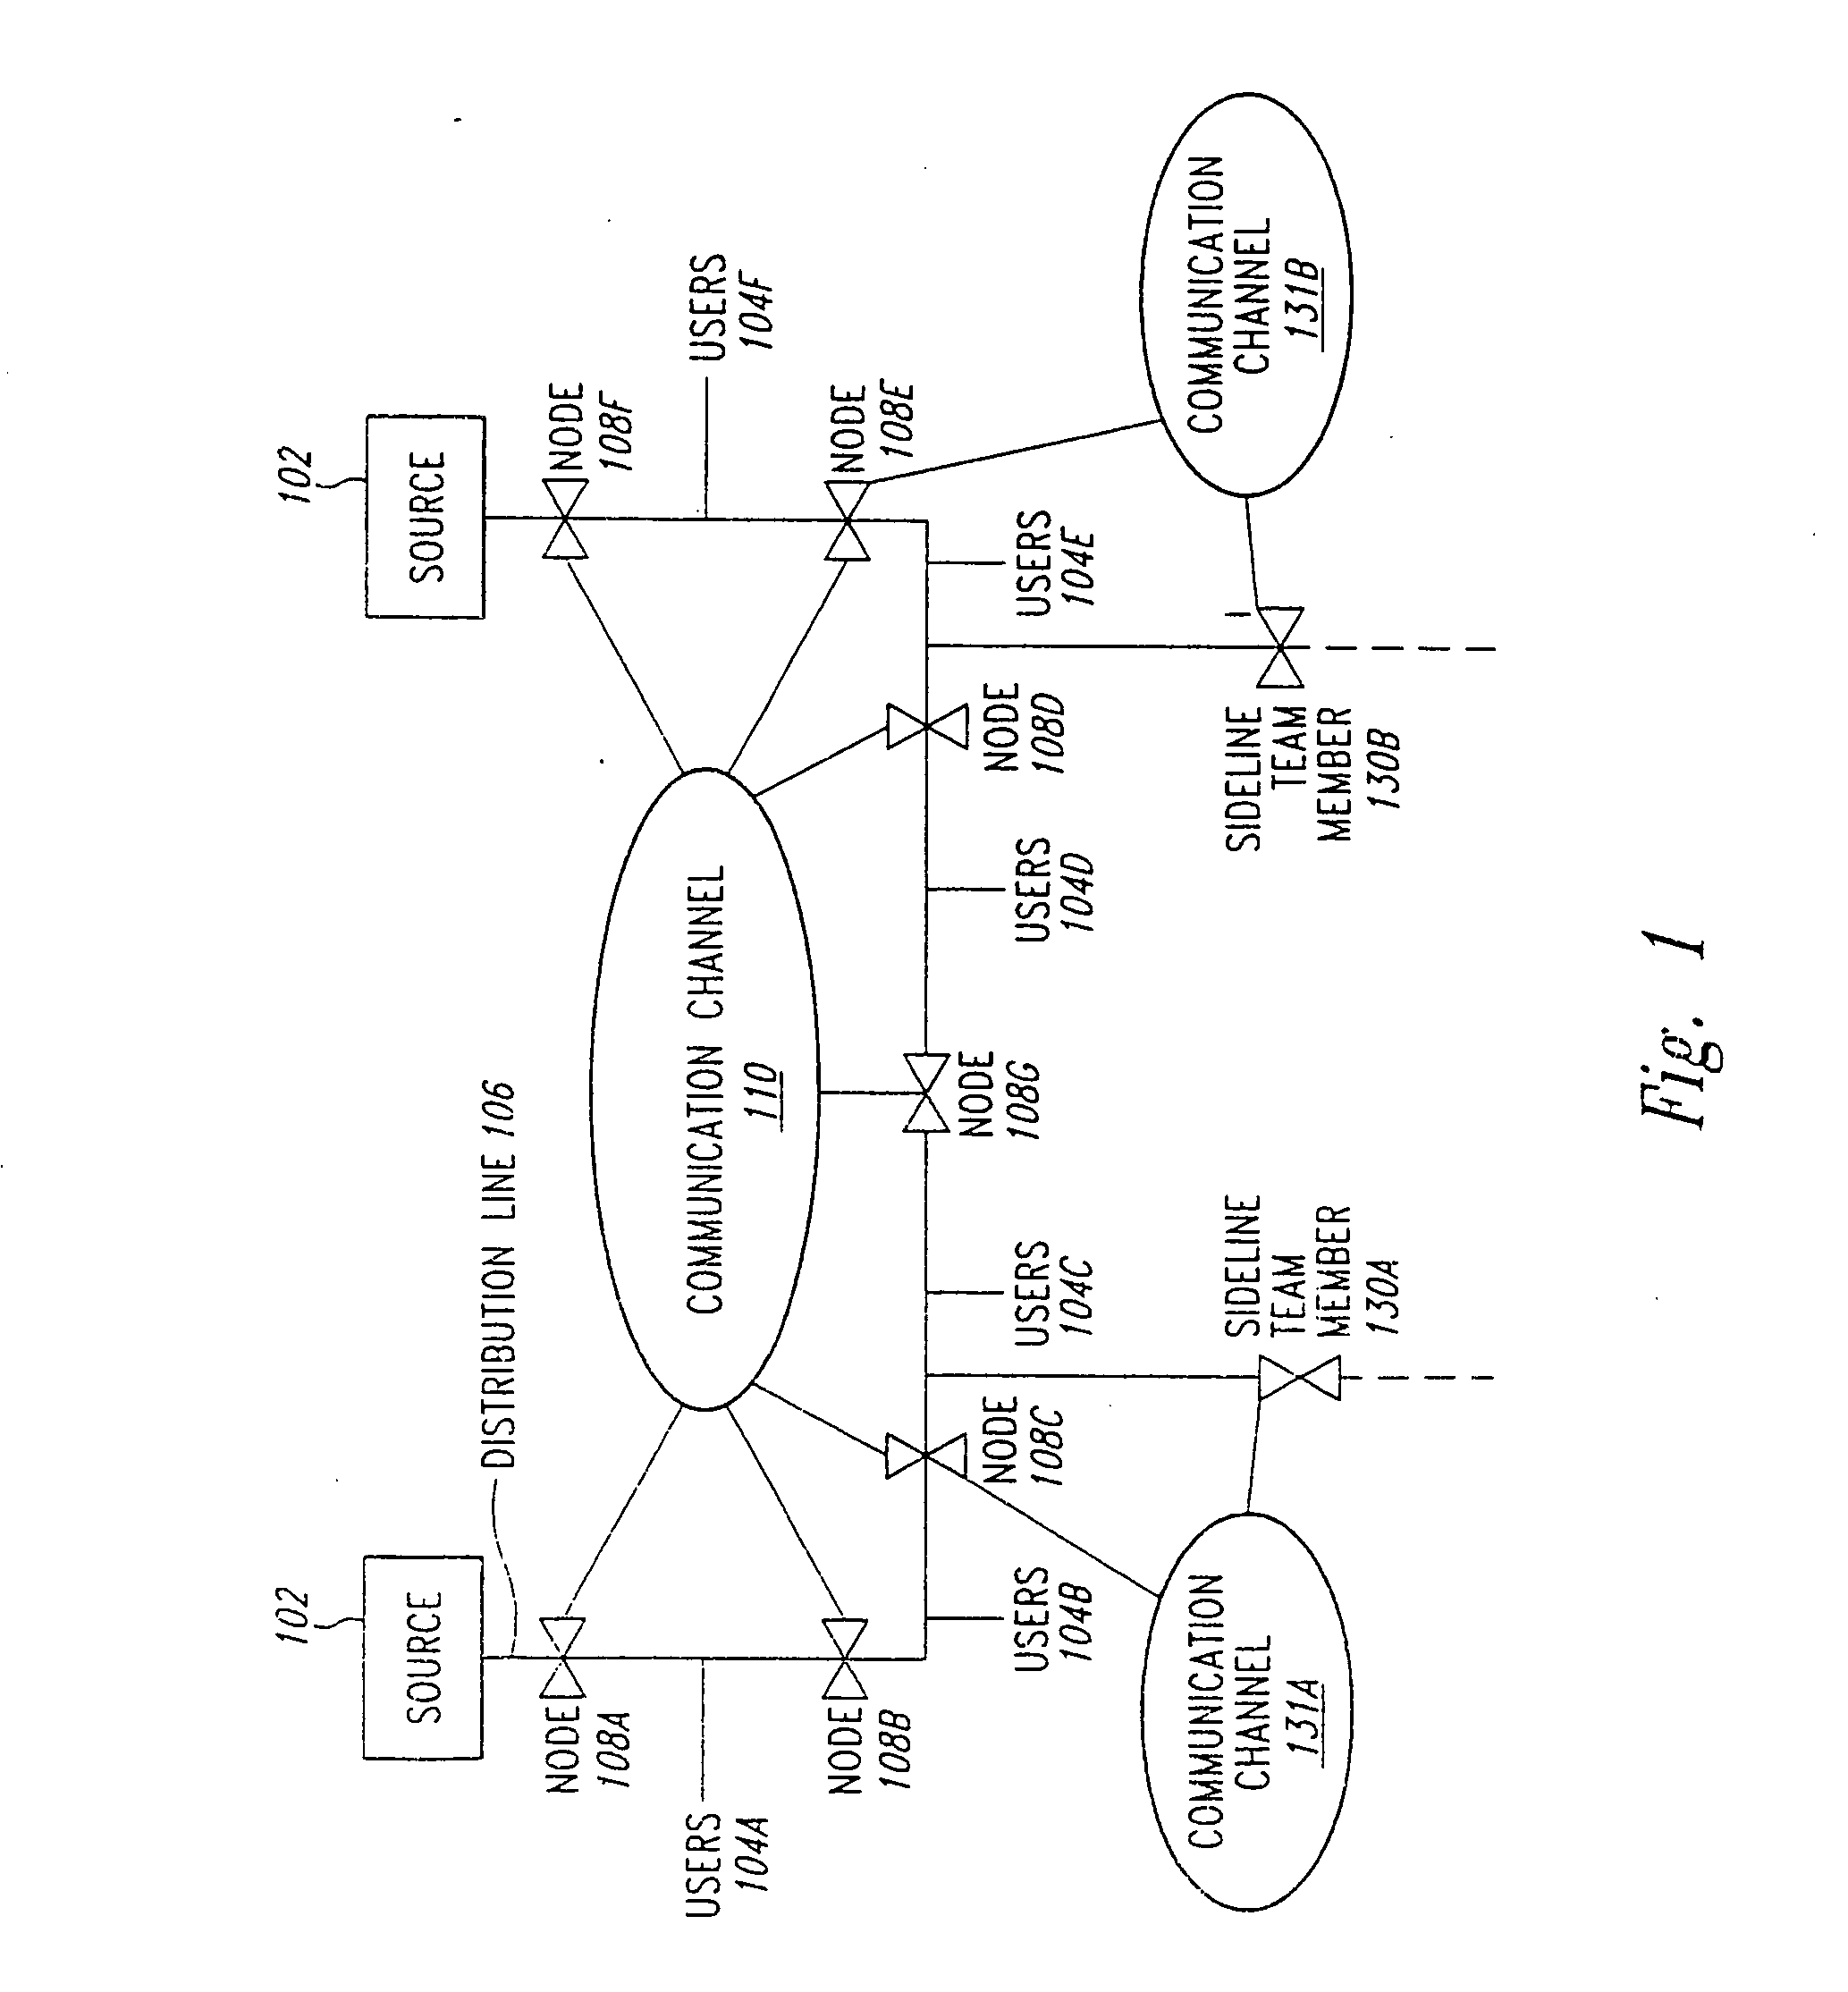 Method and apparatus for control of an electric power distribution system in response to circuit abnormalities